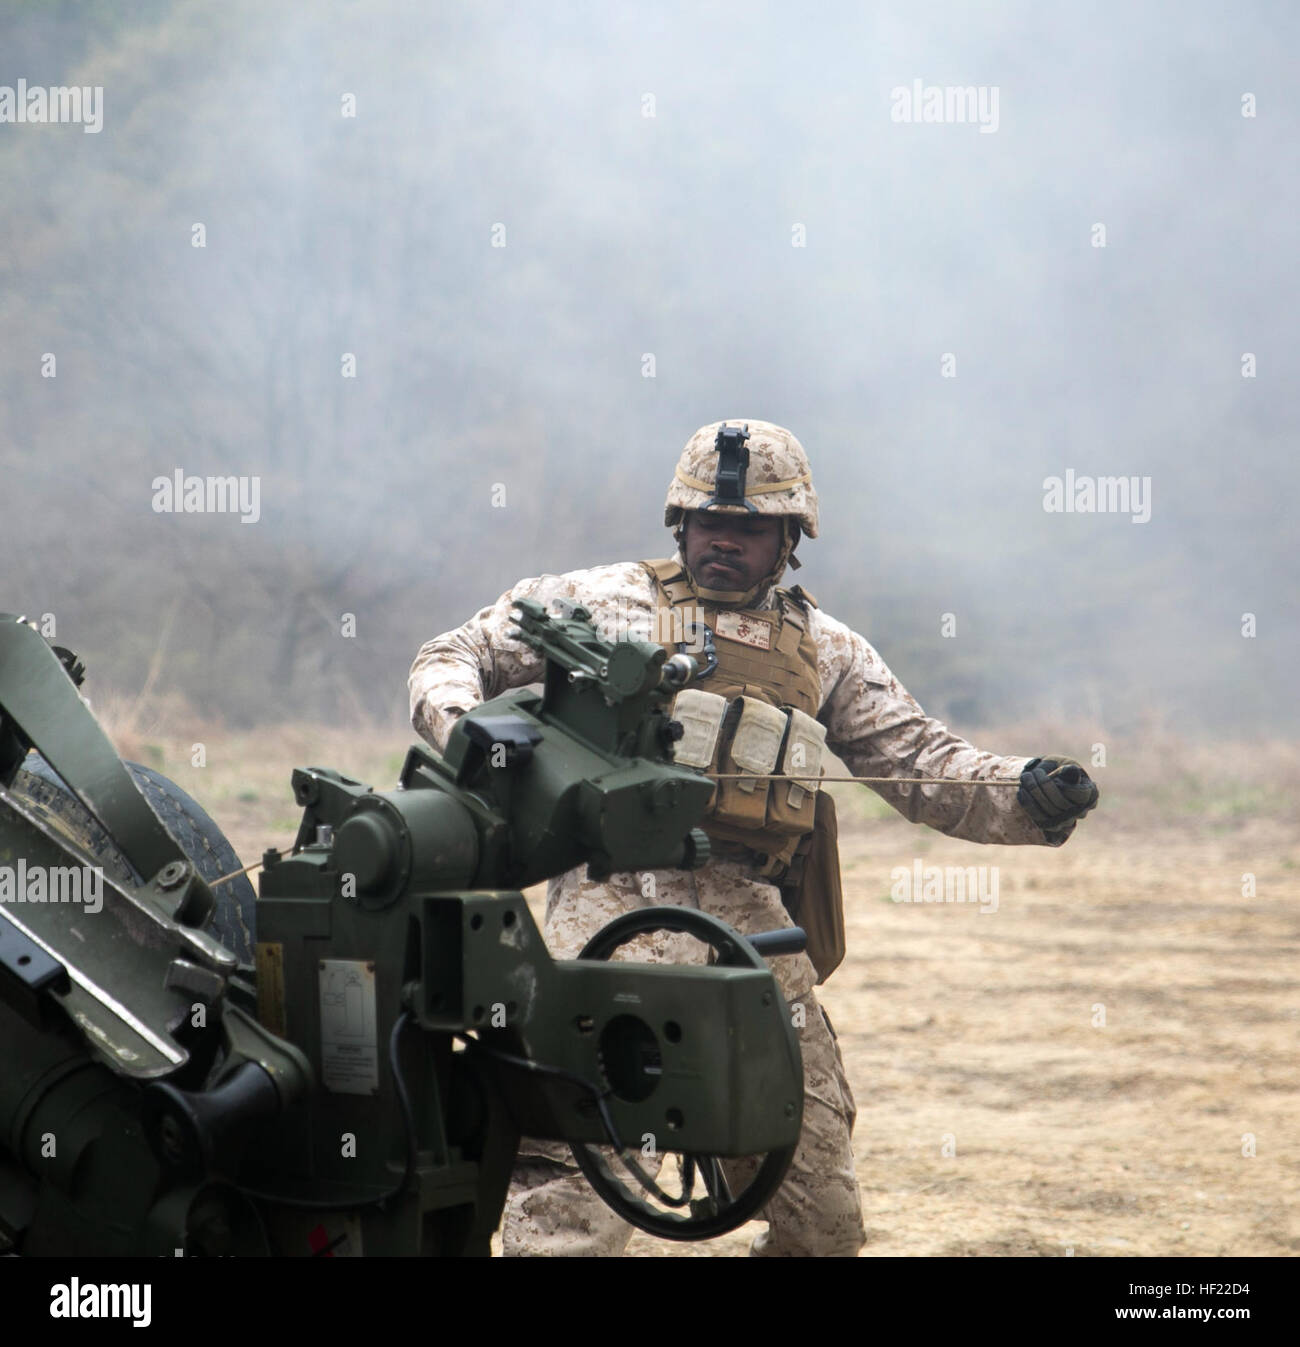 Cpl. Andre Baxter pulls the cord to fire off an M777A2 lightweight 155 mm howitzers April 3 at Su Seung-ri Range in the Republic of Korea as part of Exercise Ssang Yong 2014 The Marines shot off a total of 40 rounds between four weapons in less than five minutes. Ssang Yong is an exercise that showcases the amphibious and expeditionary capabilities of the ROK and U.S. forces as well as the maturity of the relationship between the two nations. Baxter, a native of New York City, is a field artillery cannoneer with Golf Battery, 2nd Battalion, 11th Marine Regiment currently assigned to Battalion  Stock Photo